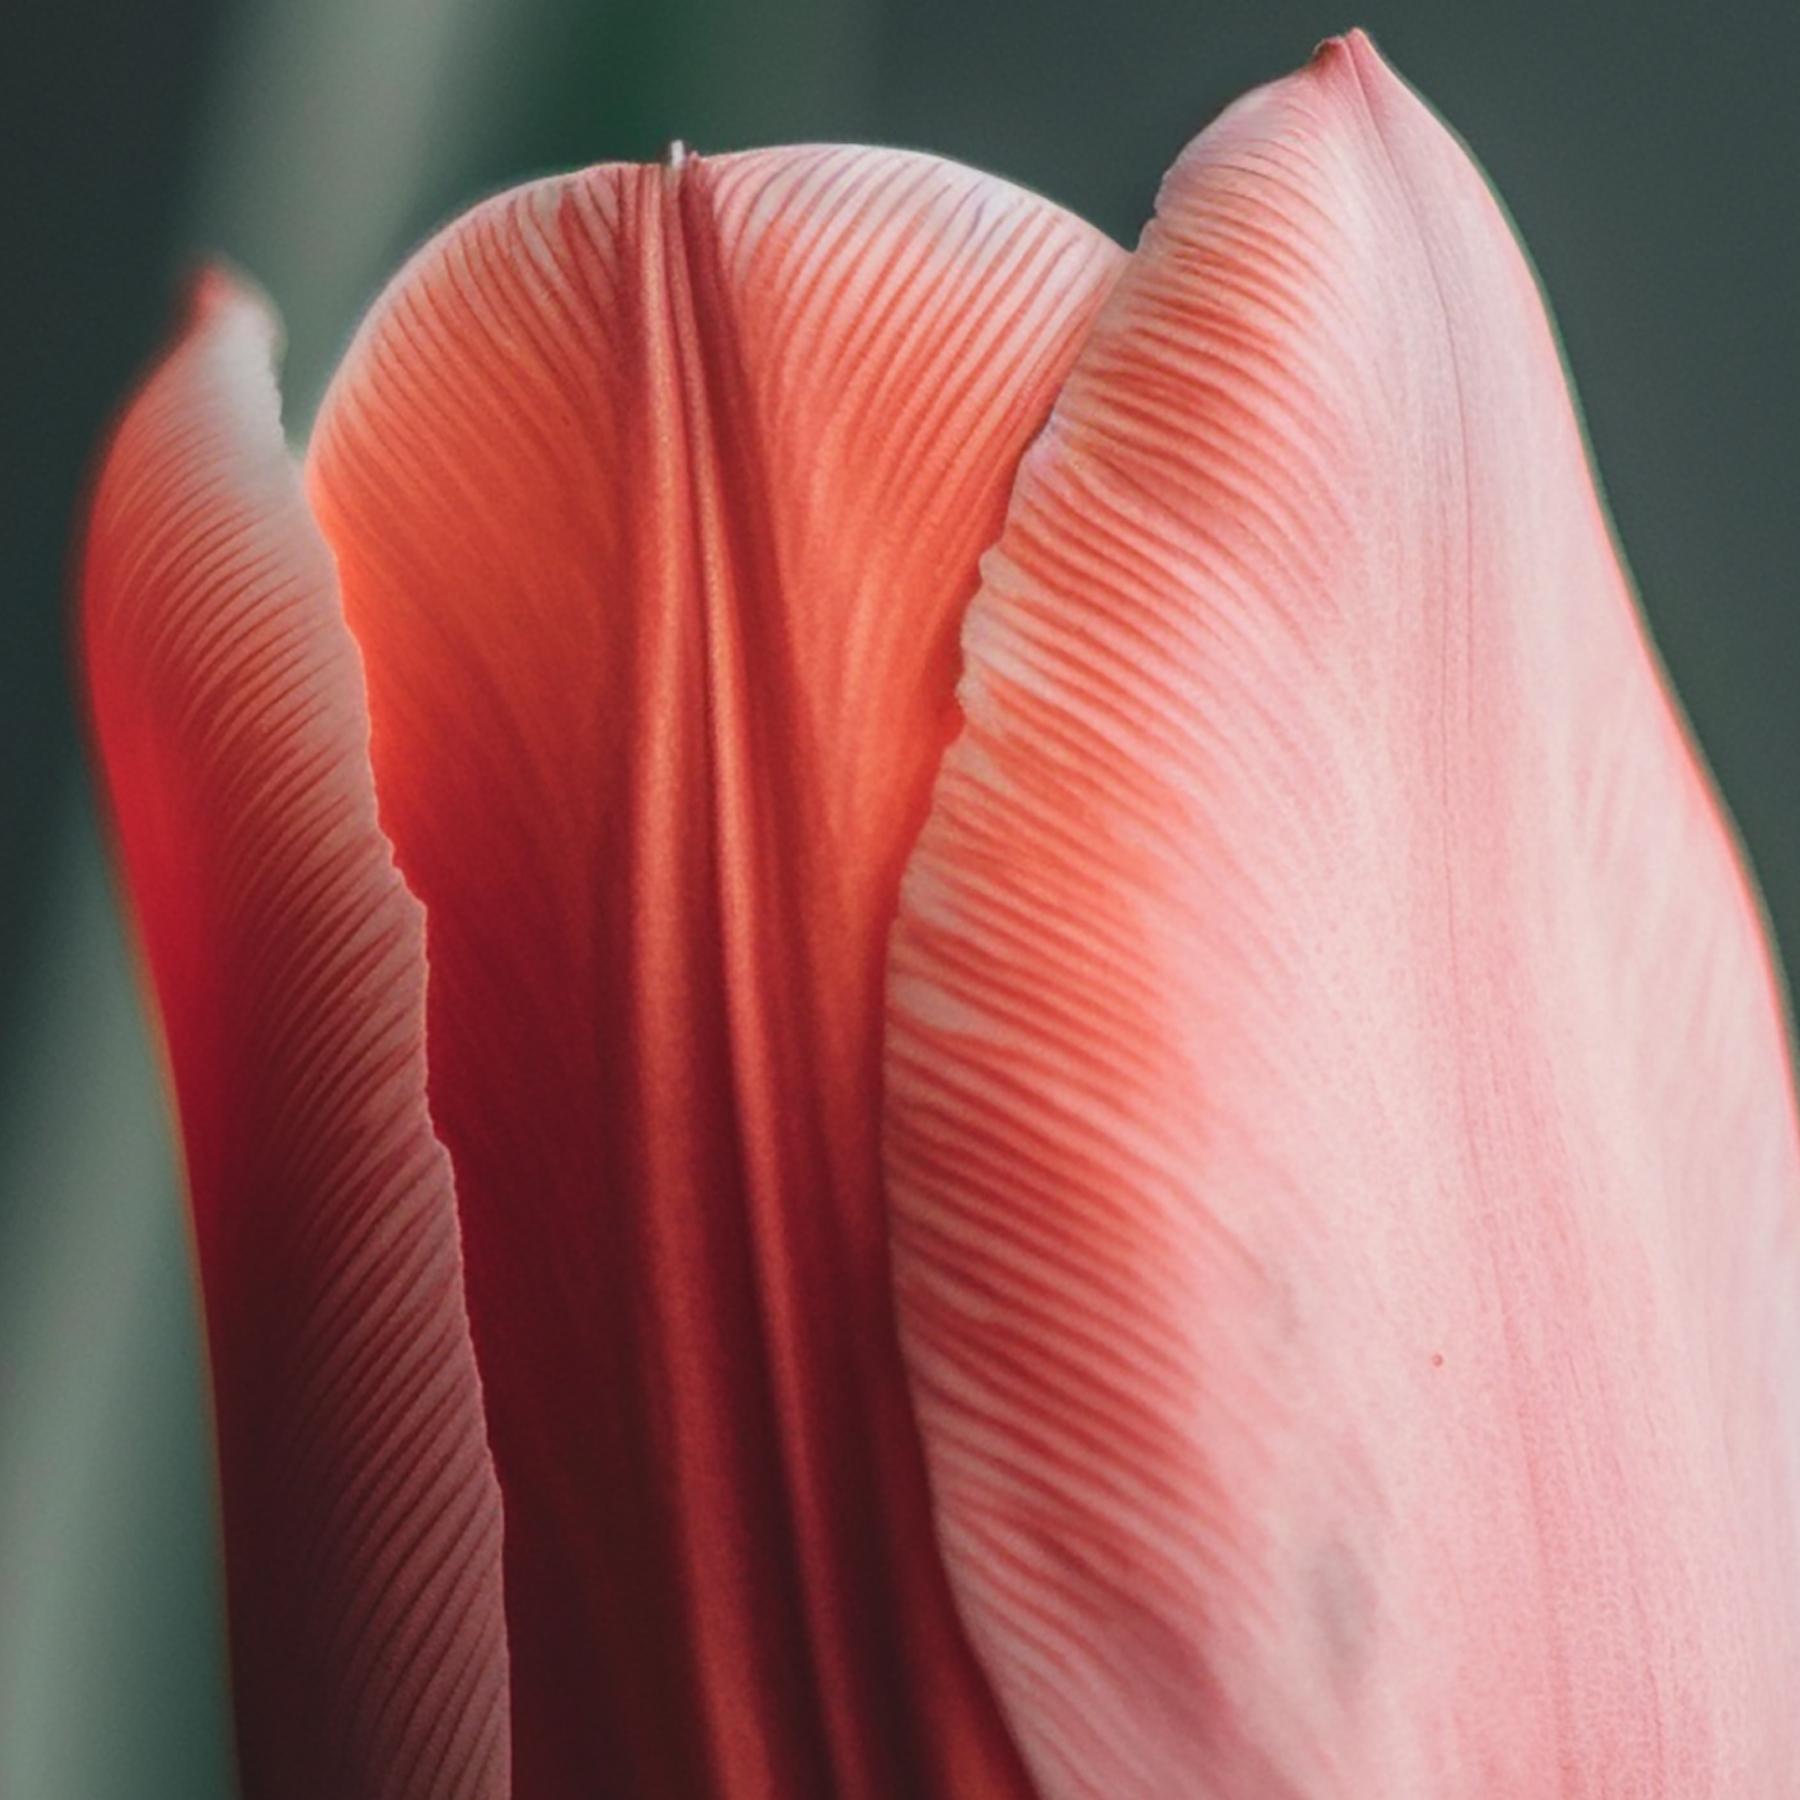 PINK TULIP II (After Georgia O'Keeffe) photograph on plexiglass  - Photograph by Max Grant